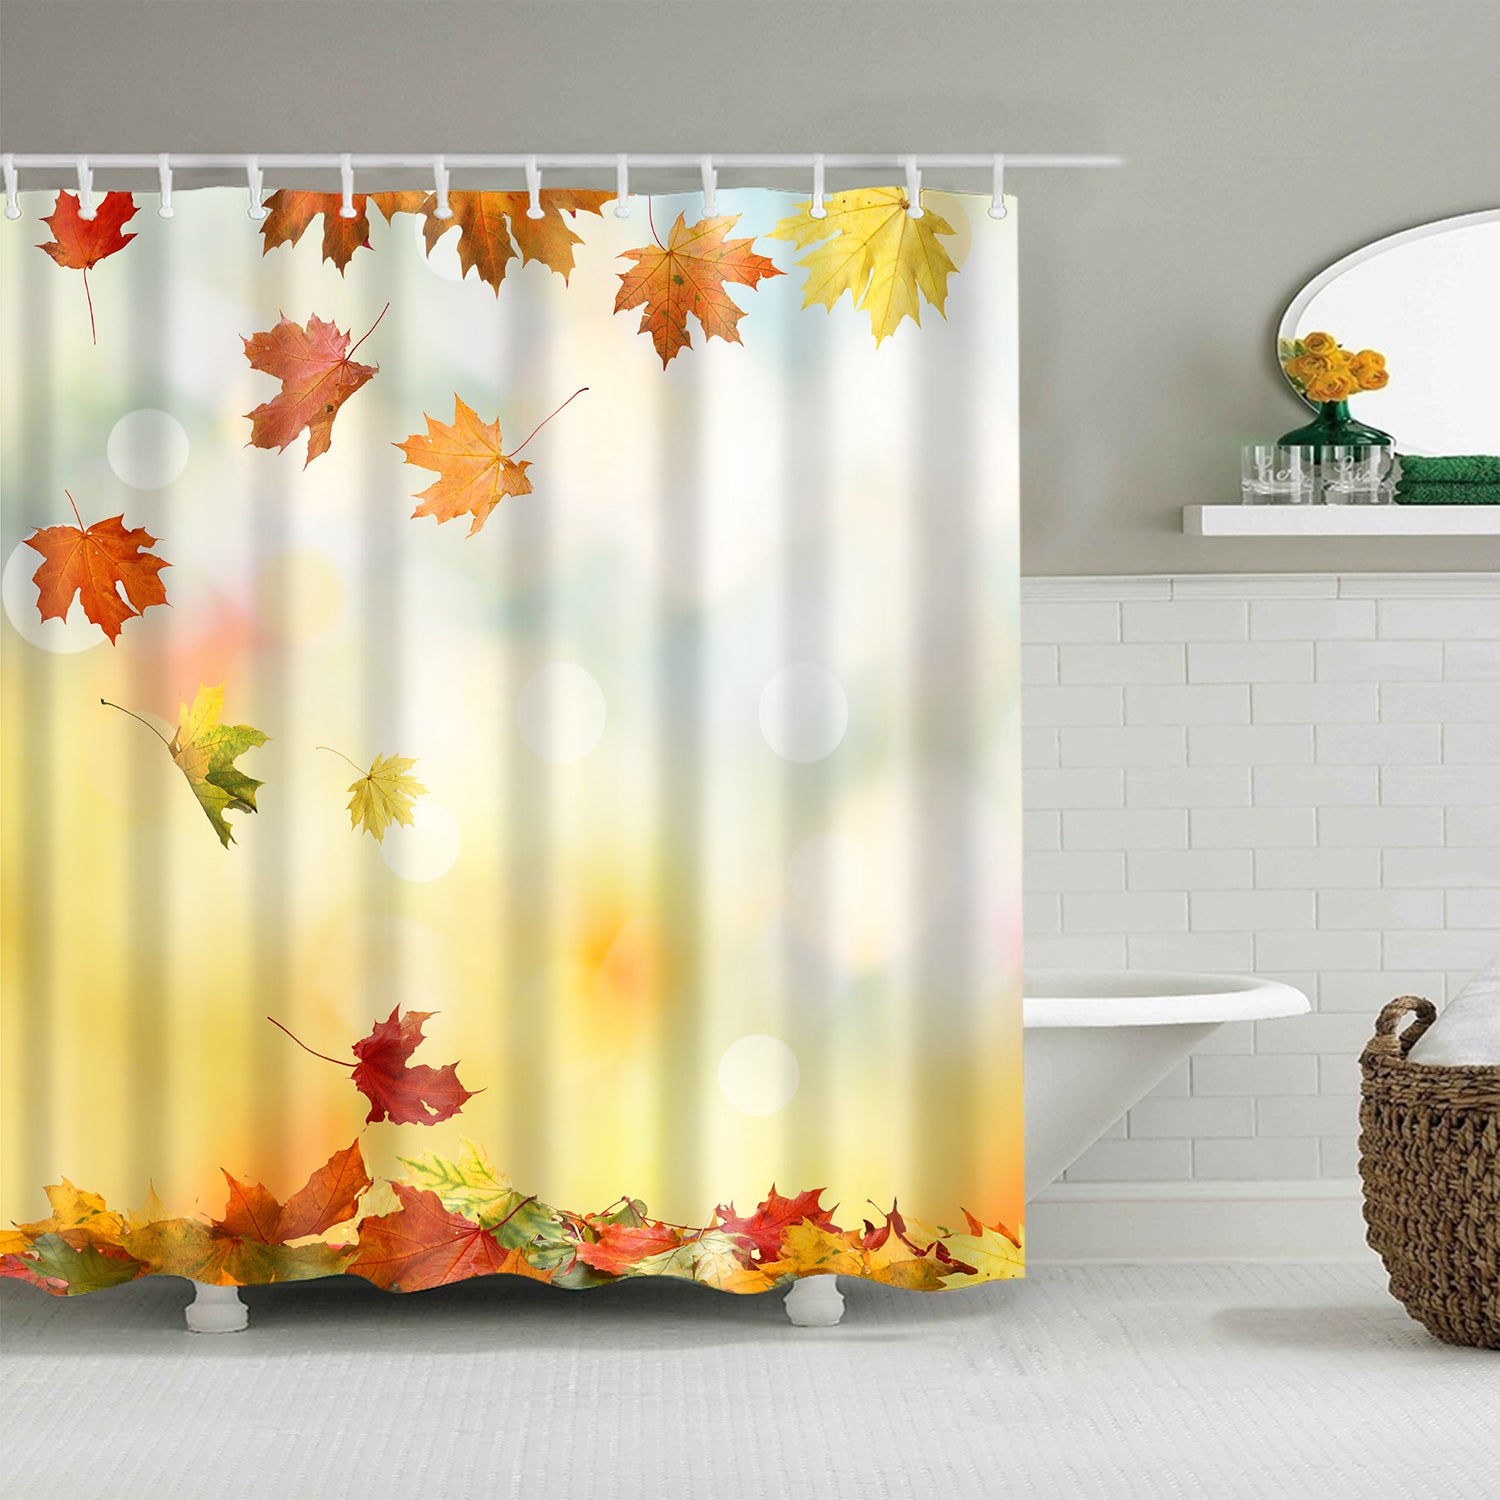 Autumnal Falling Foliage Map Leaves Shower Curtain